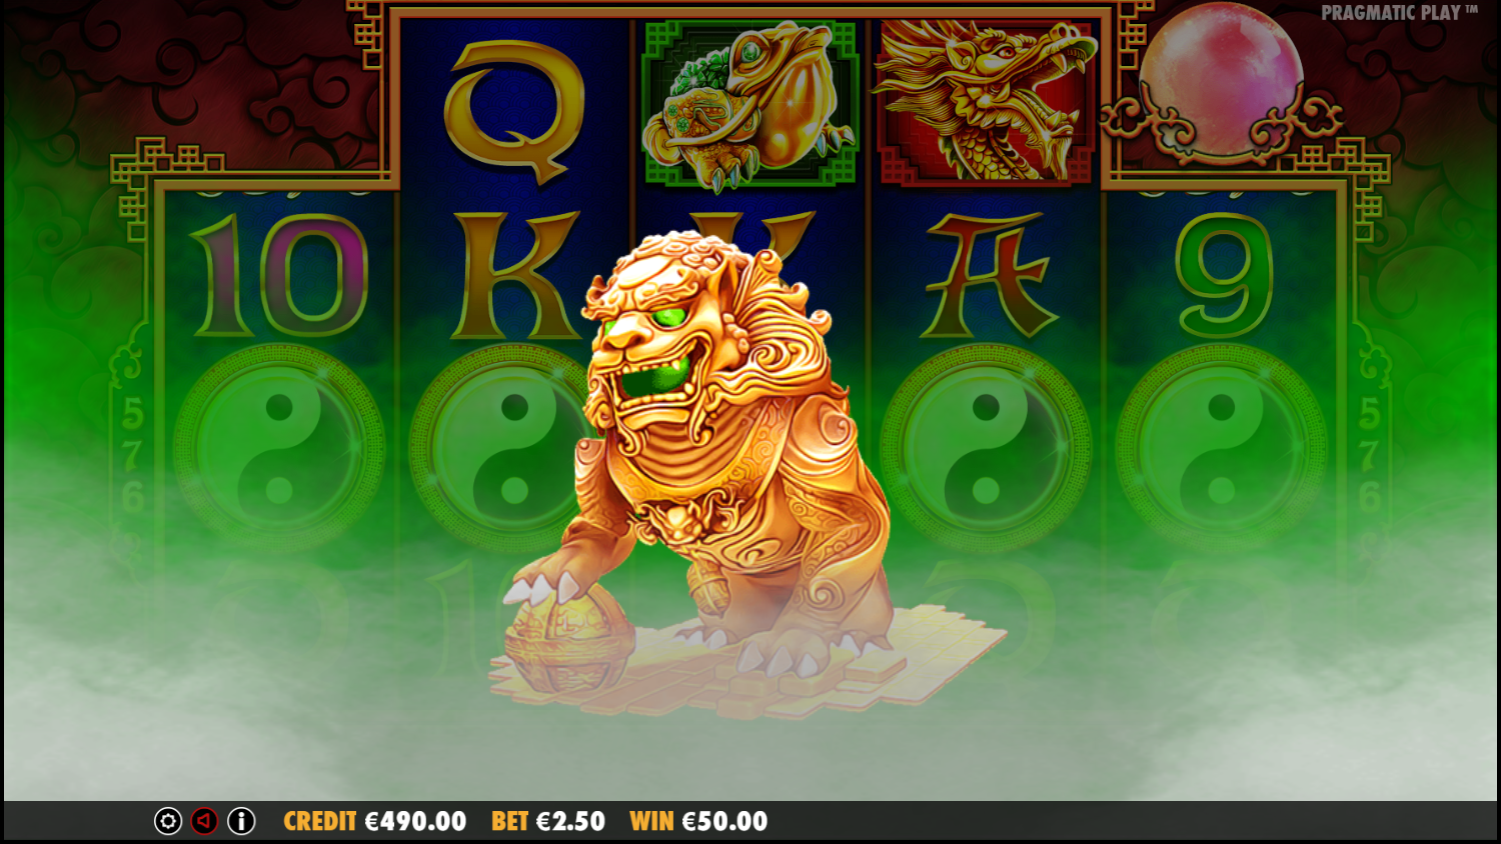 5 Lions Online Slot Game